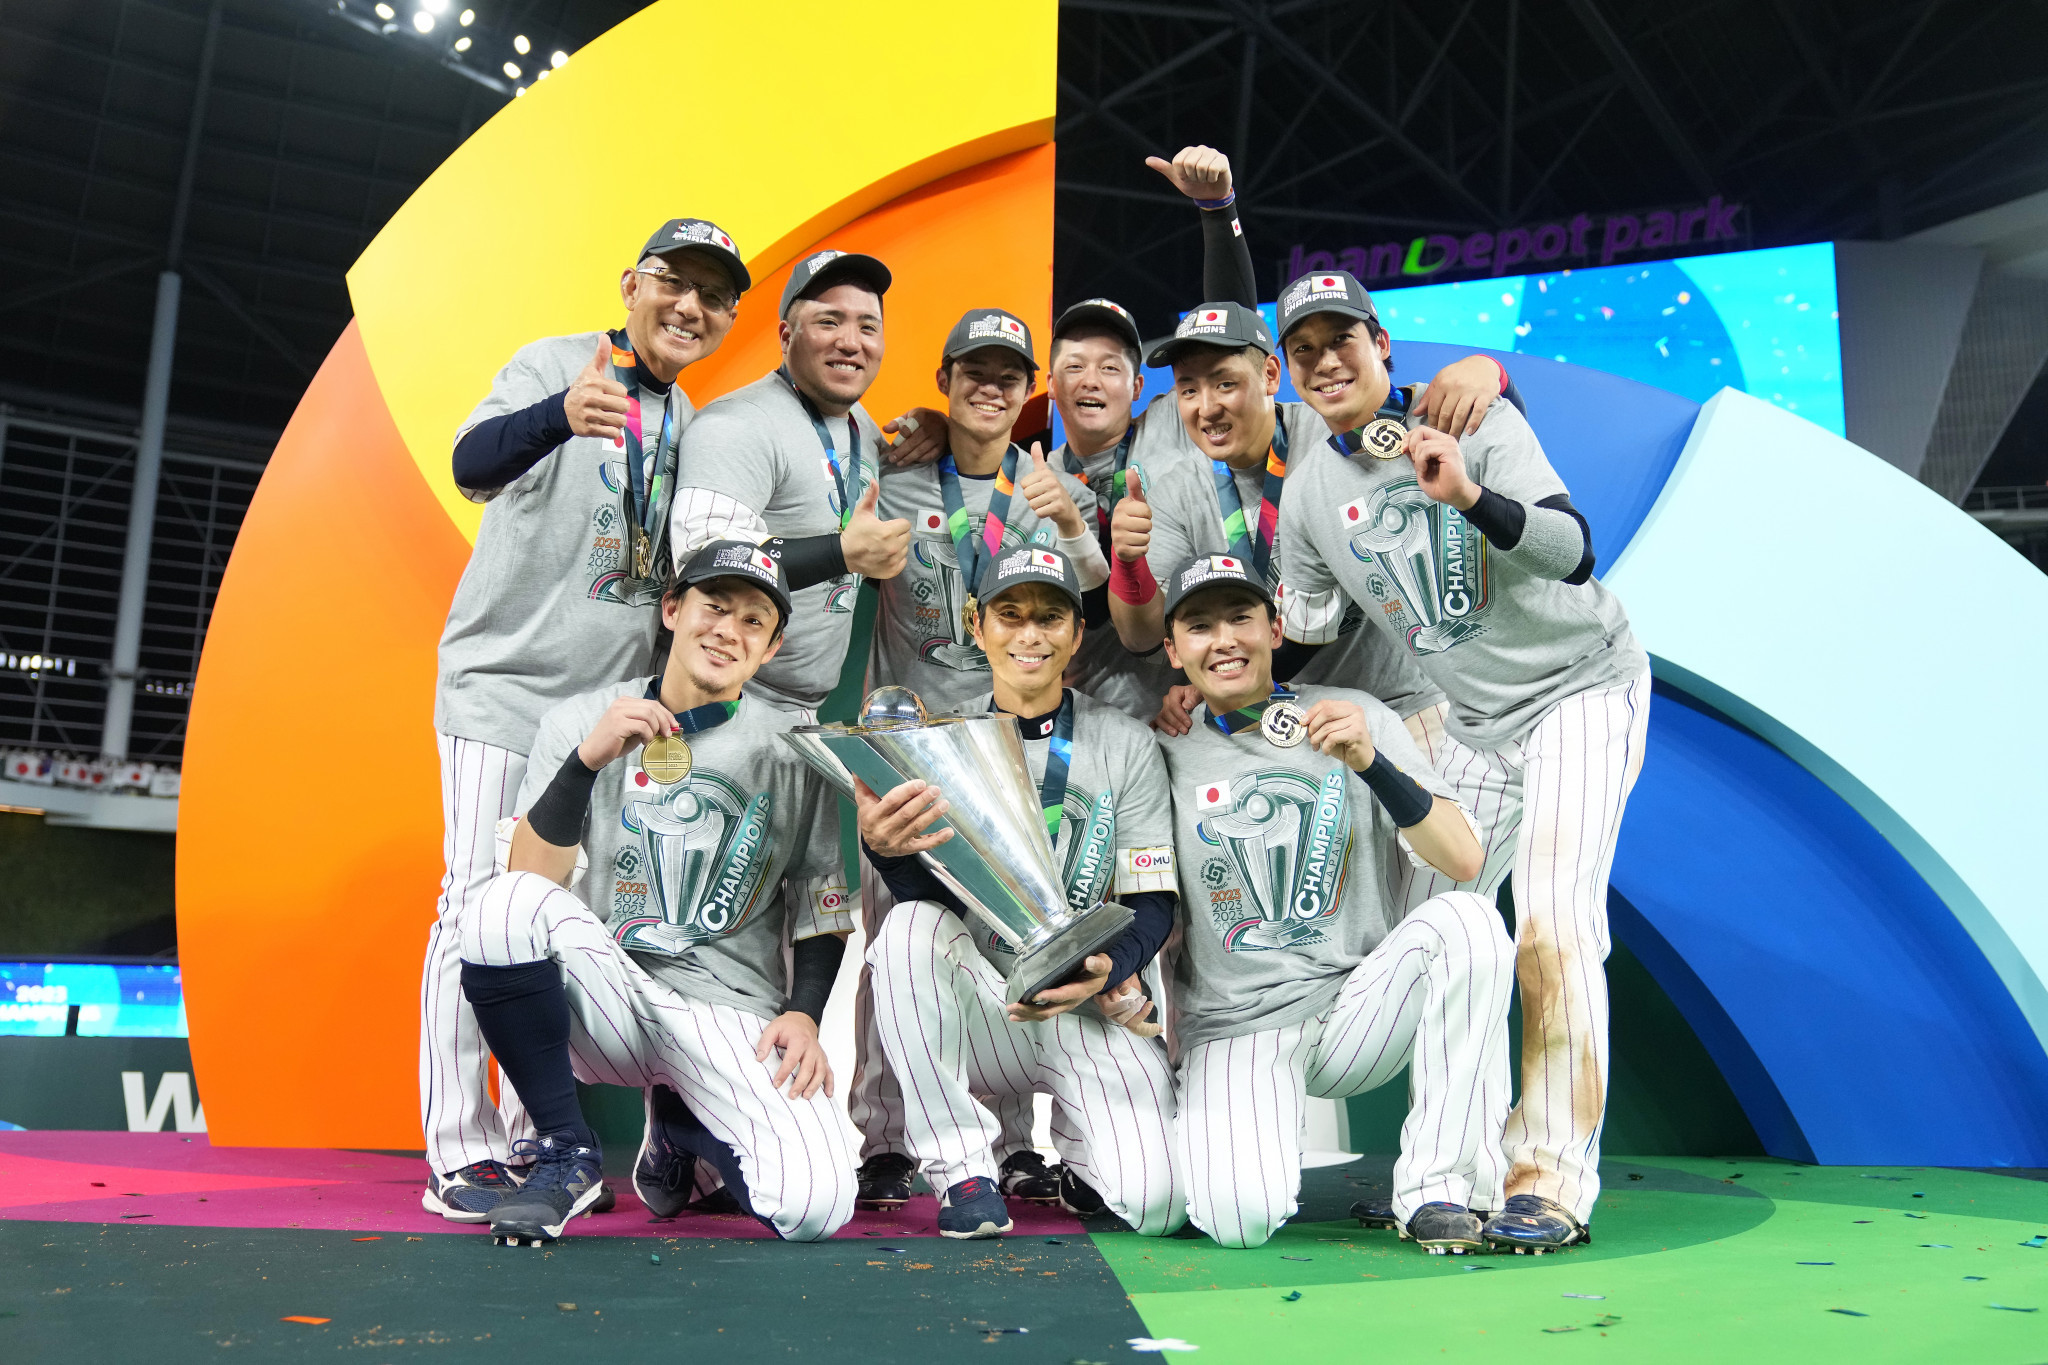 Japan stay top of World Baseball Softball Confederation rankings in latest update